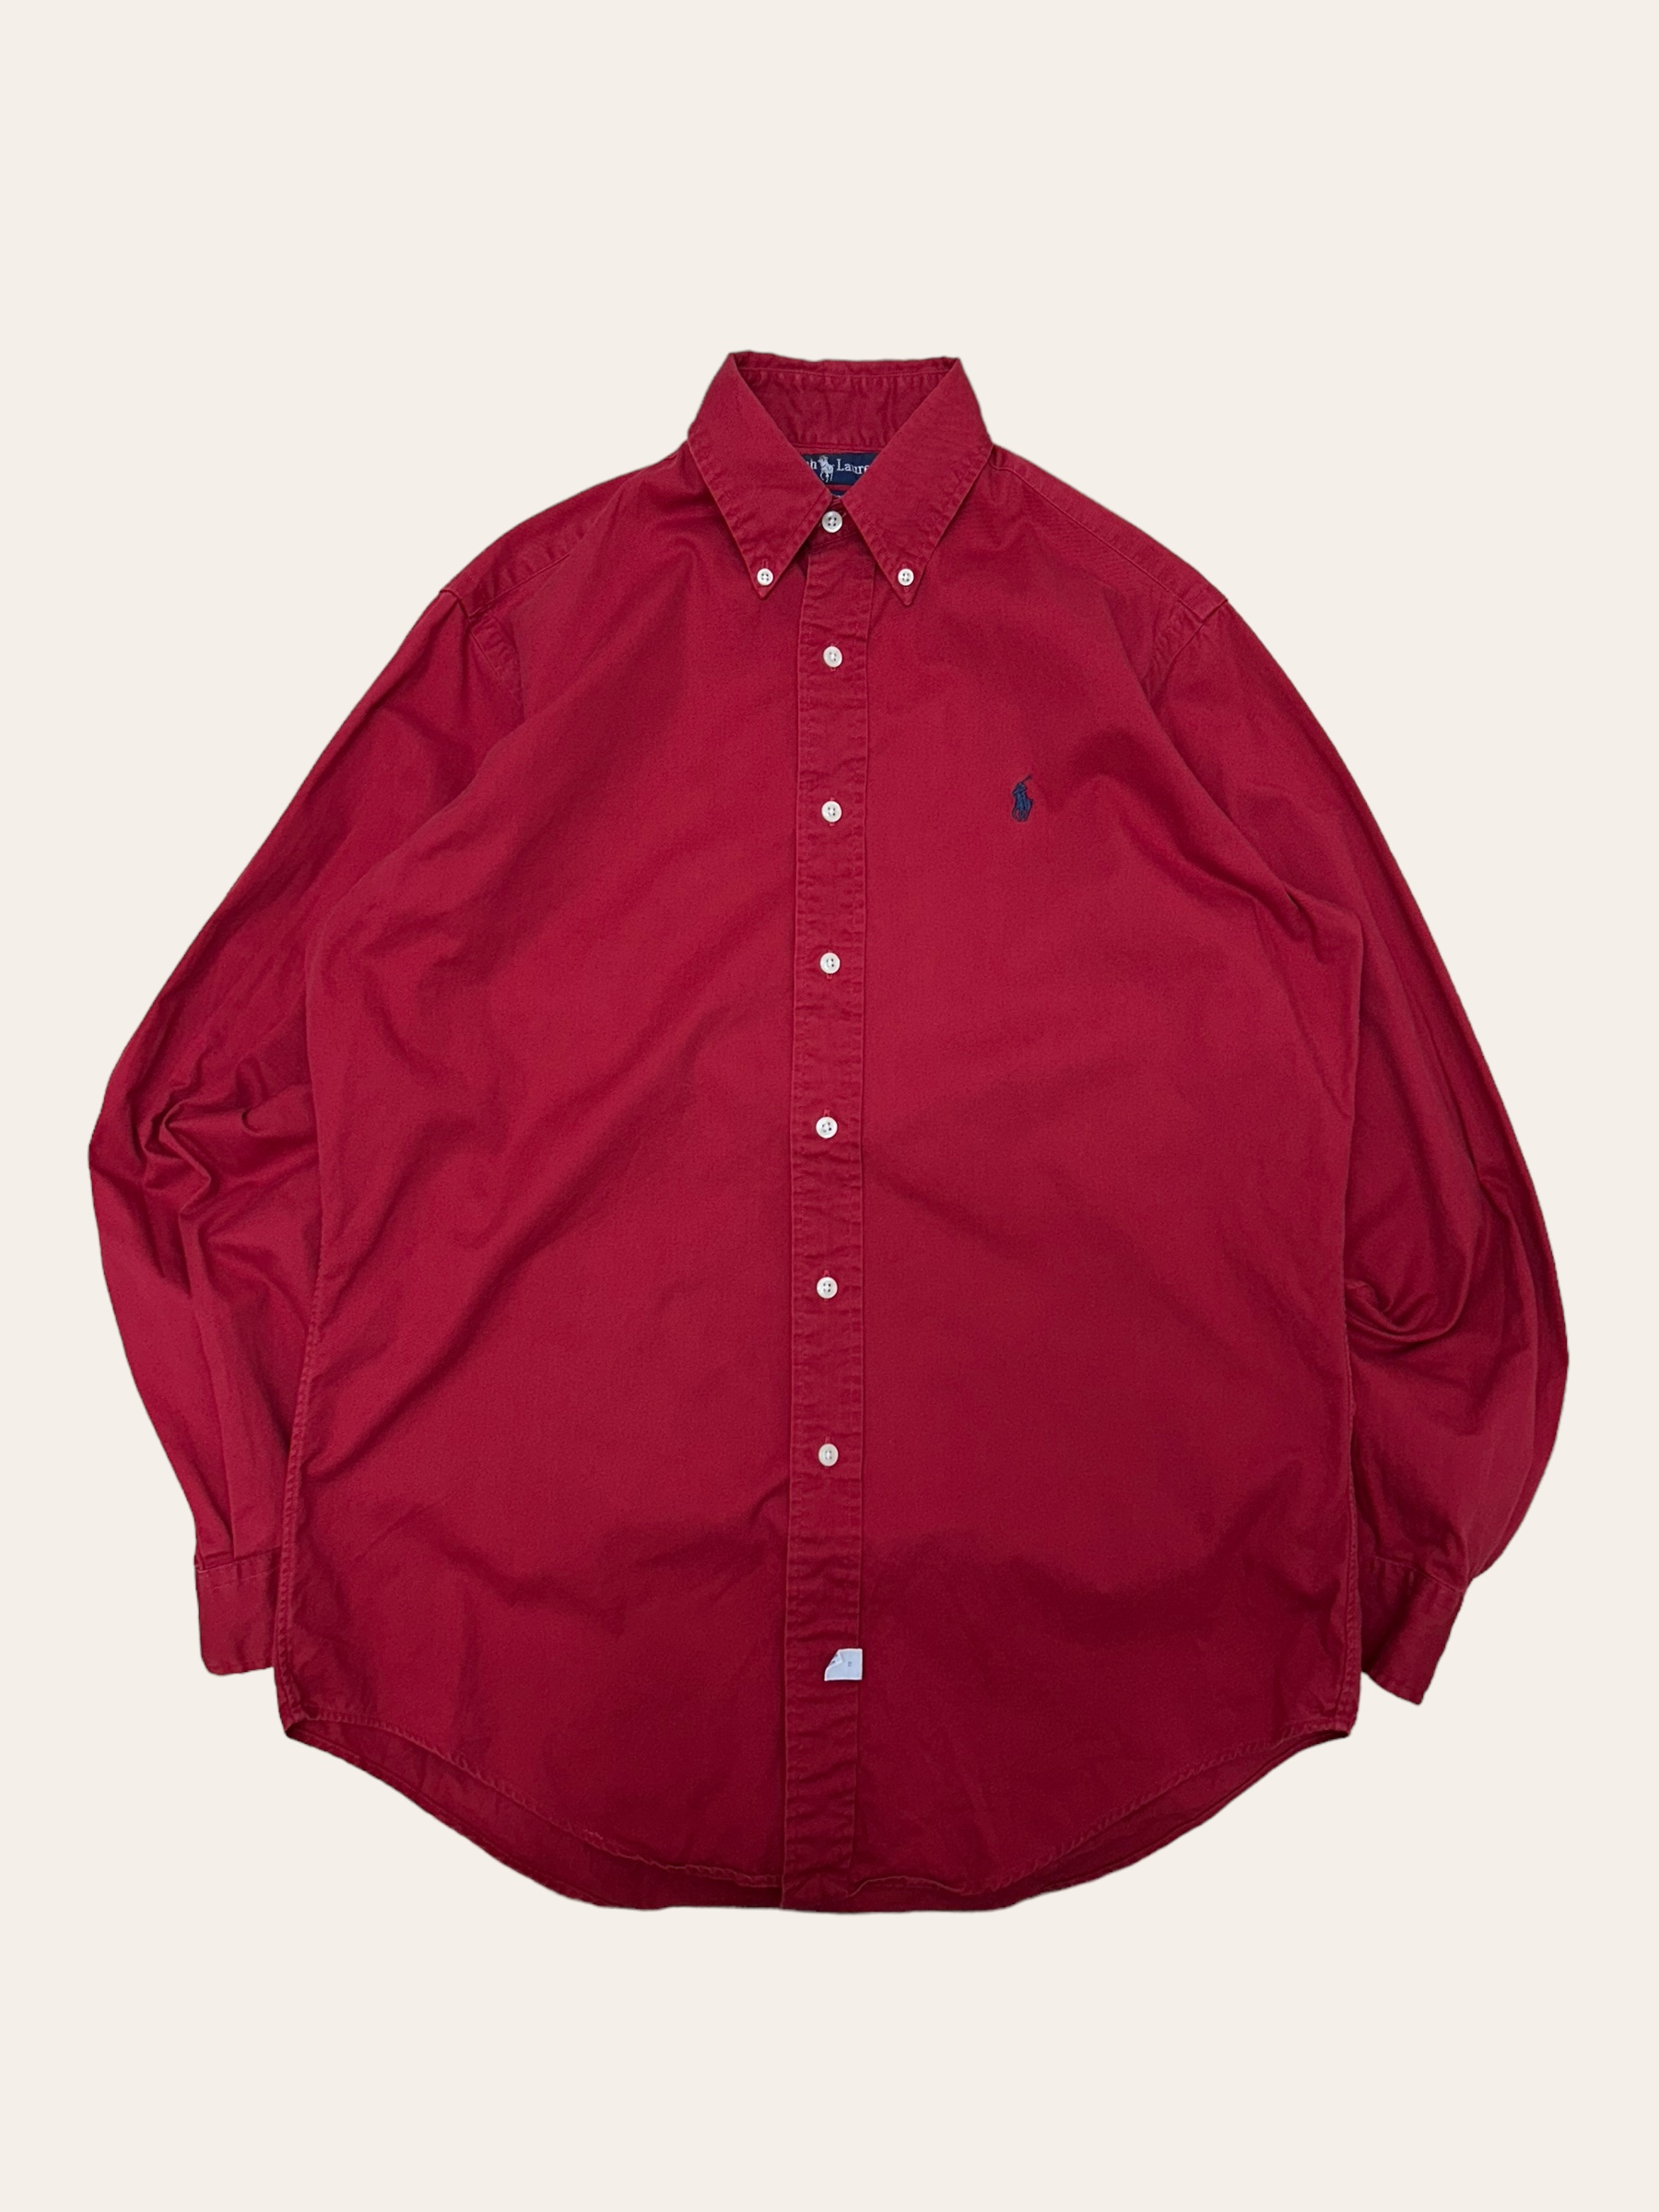 (From USA)Polo ralph lauren red solid shirt S